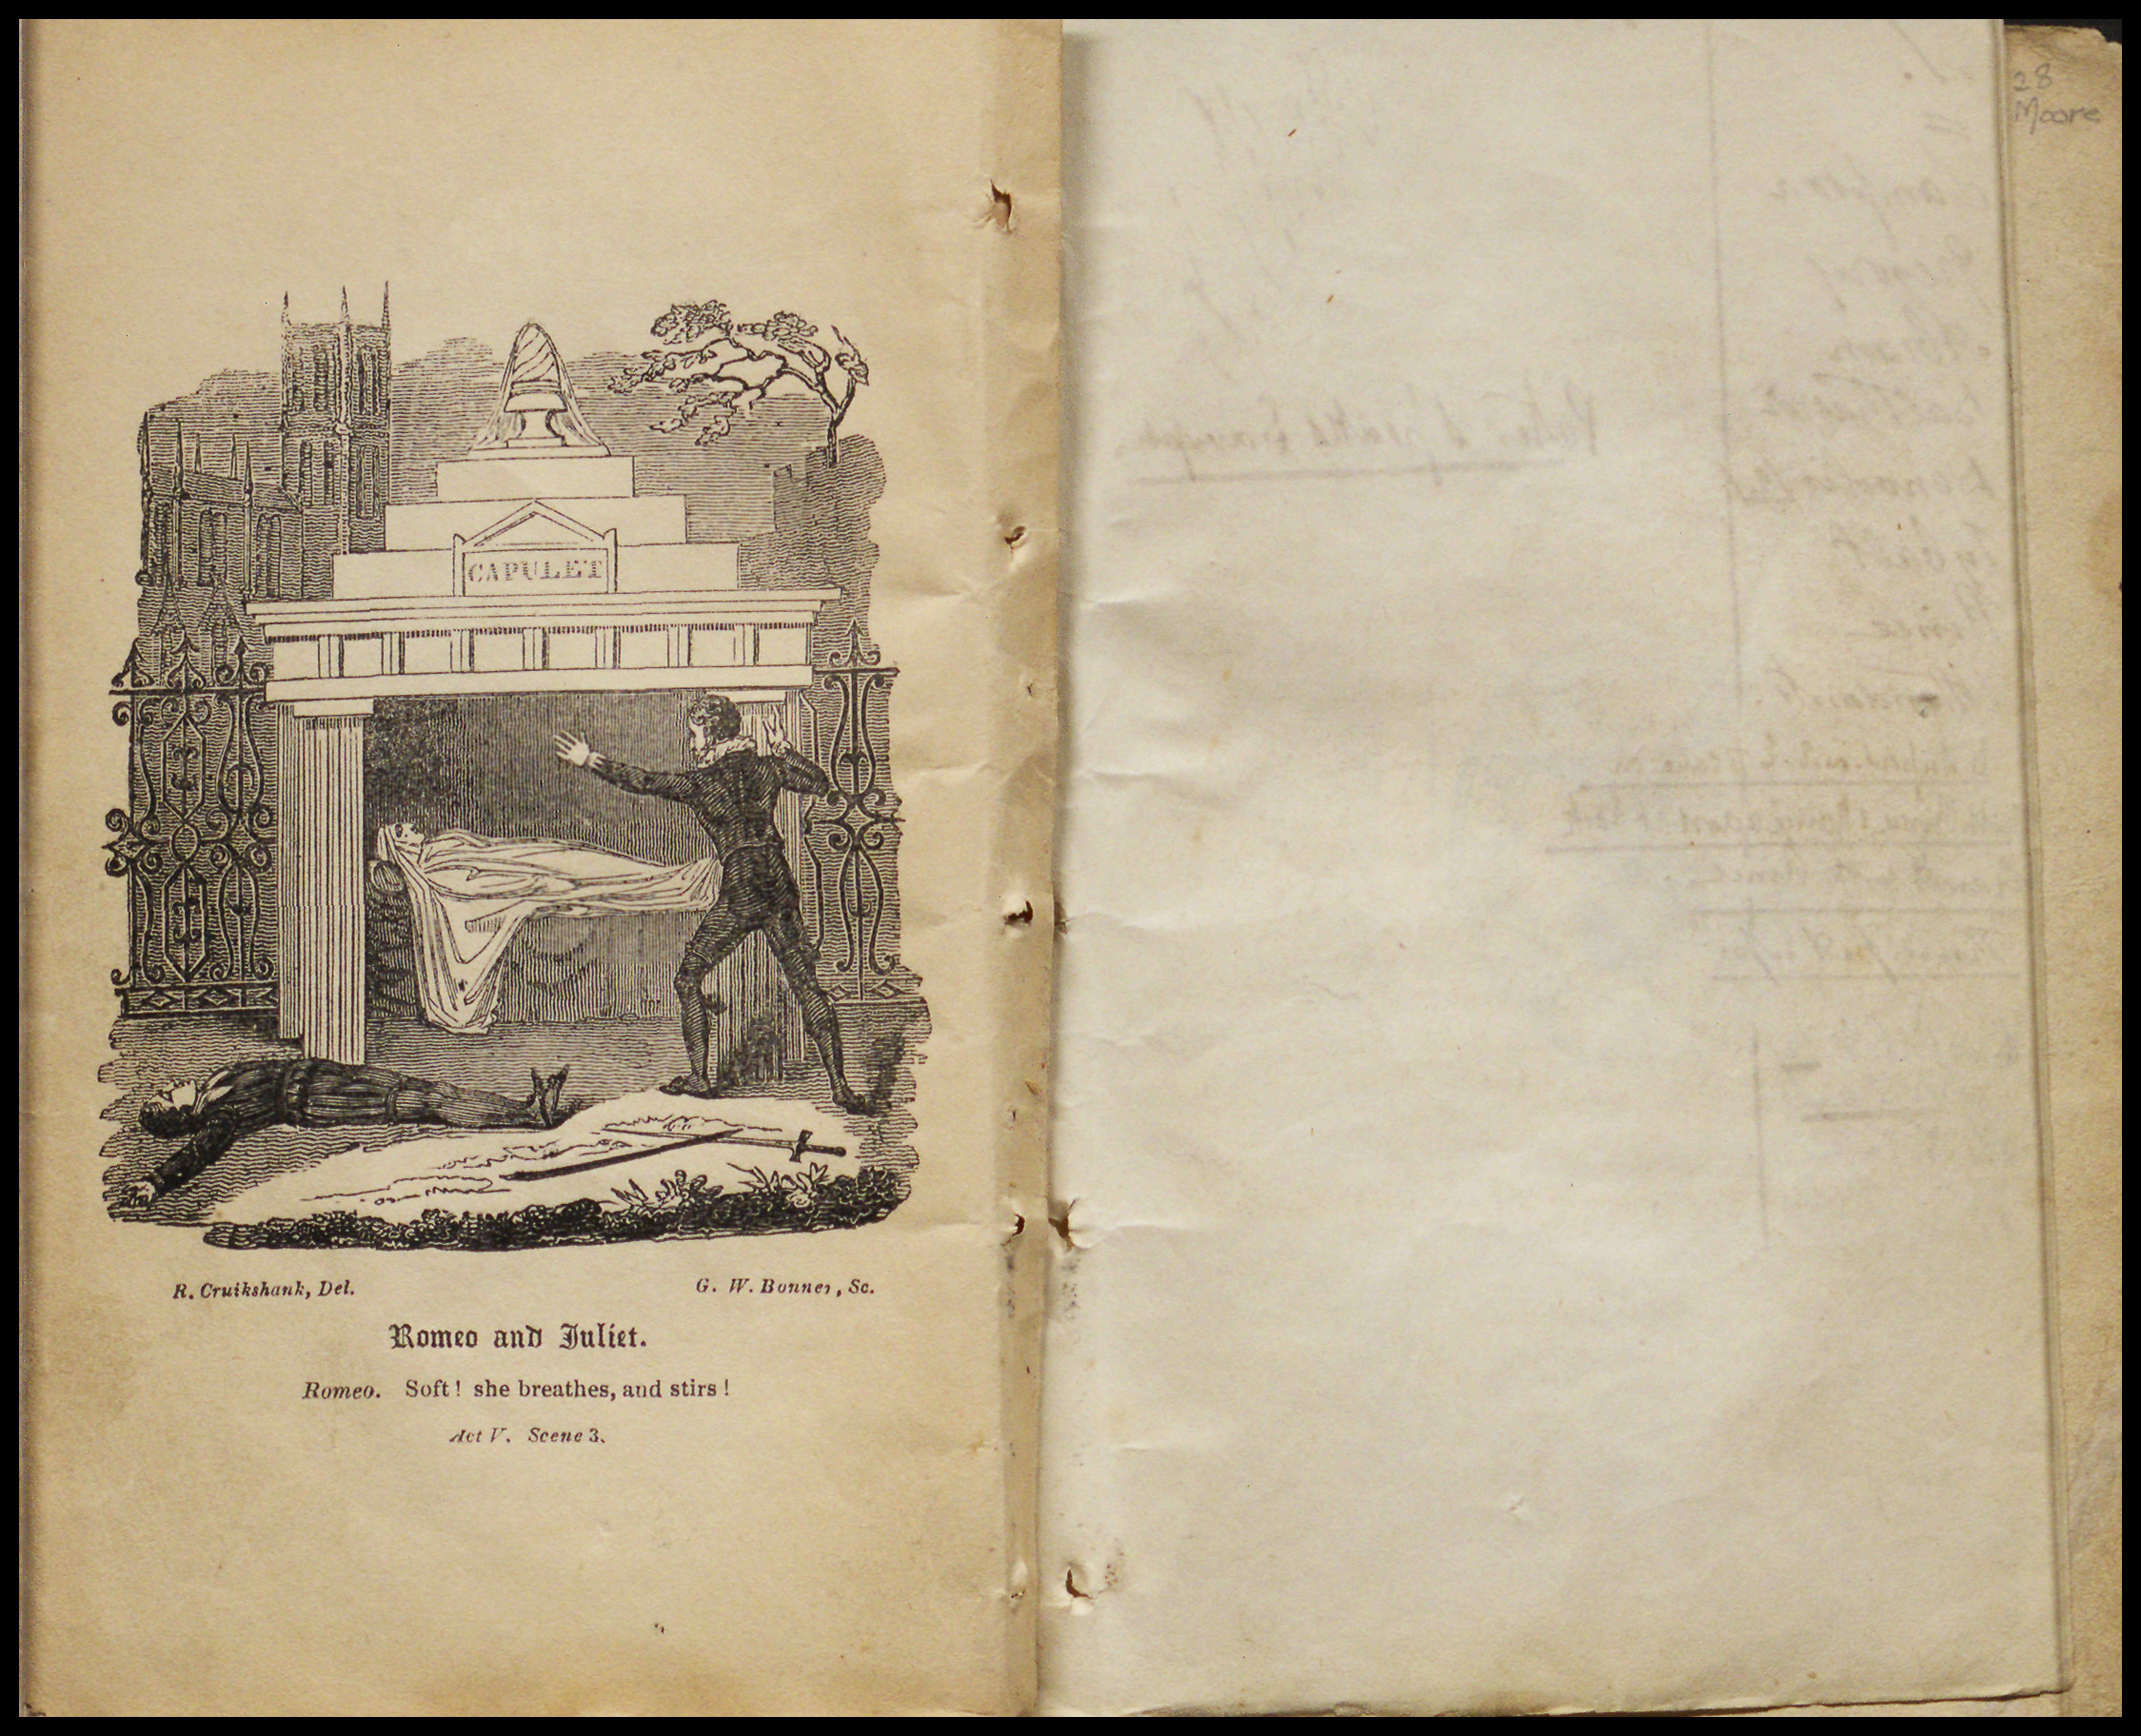 The Romeo and Juliet prompt book used for Fanny Kemble's American tour.